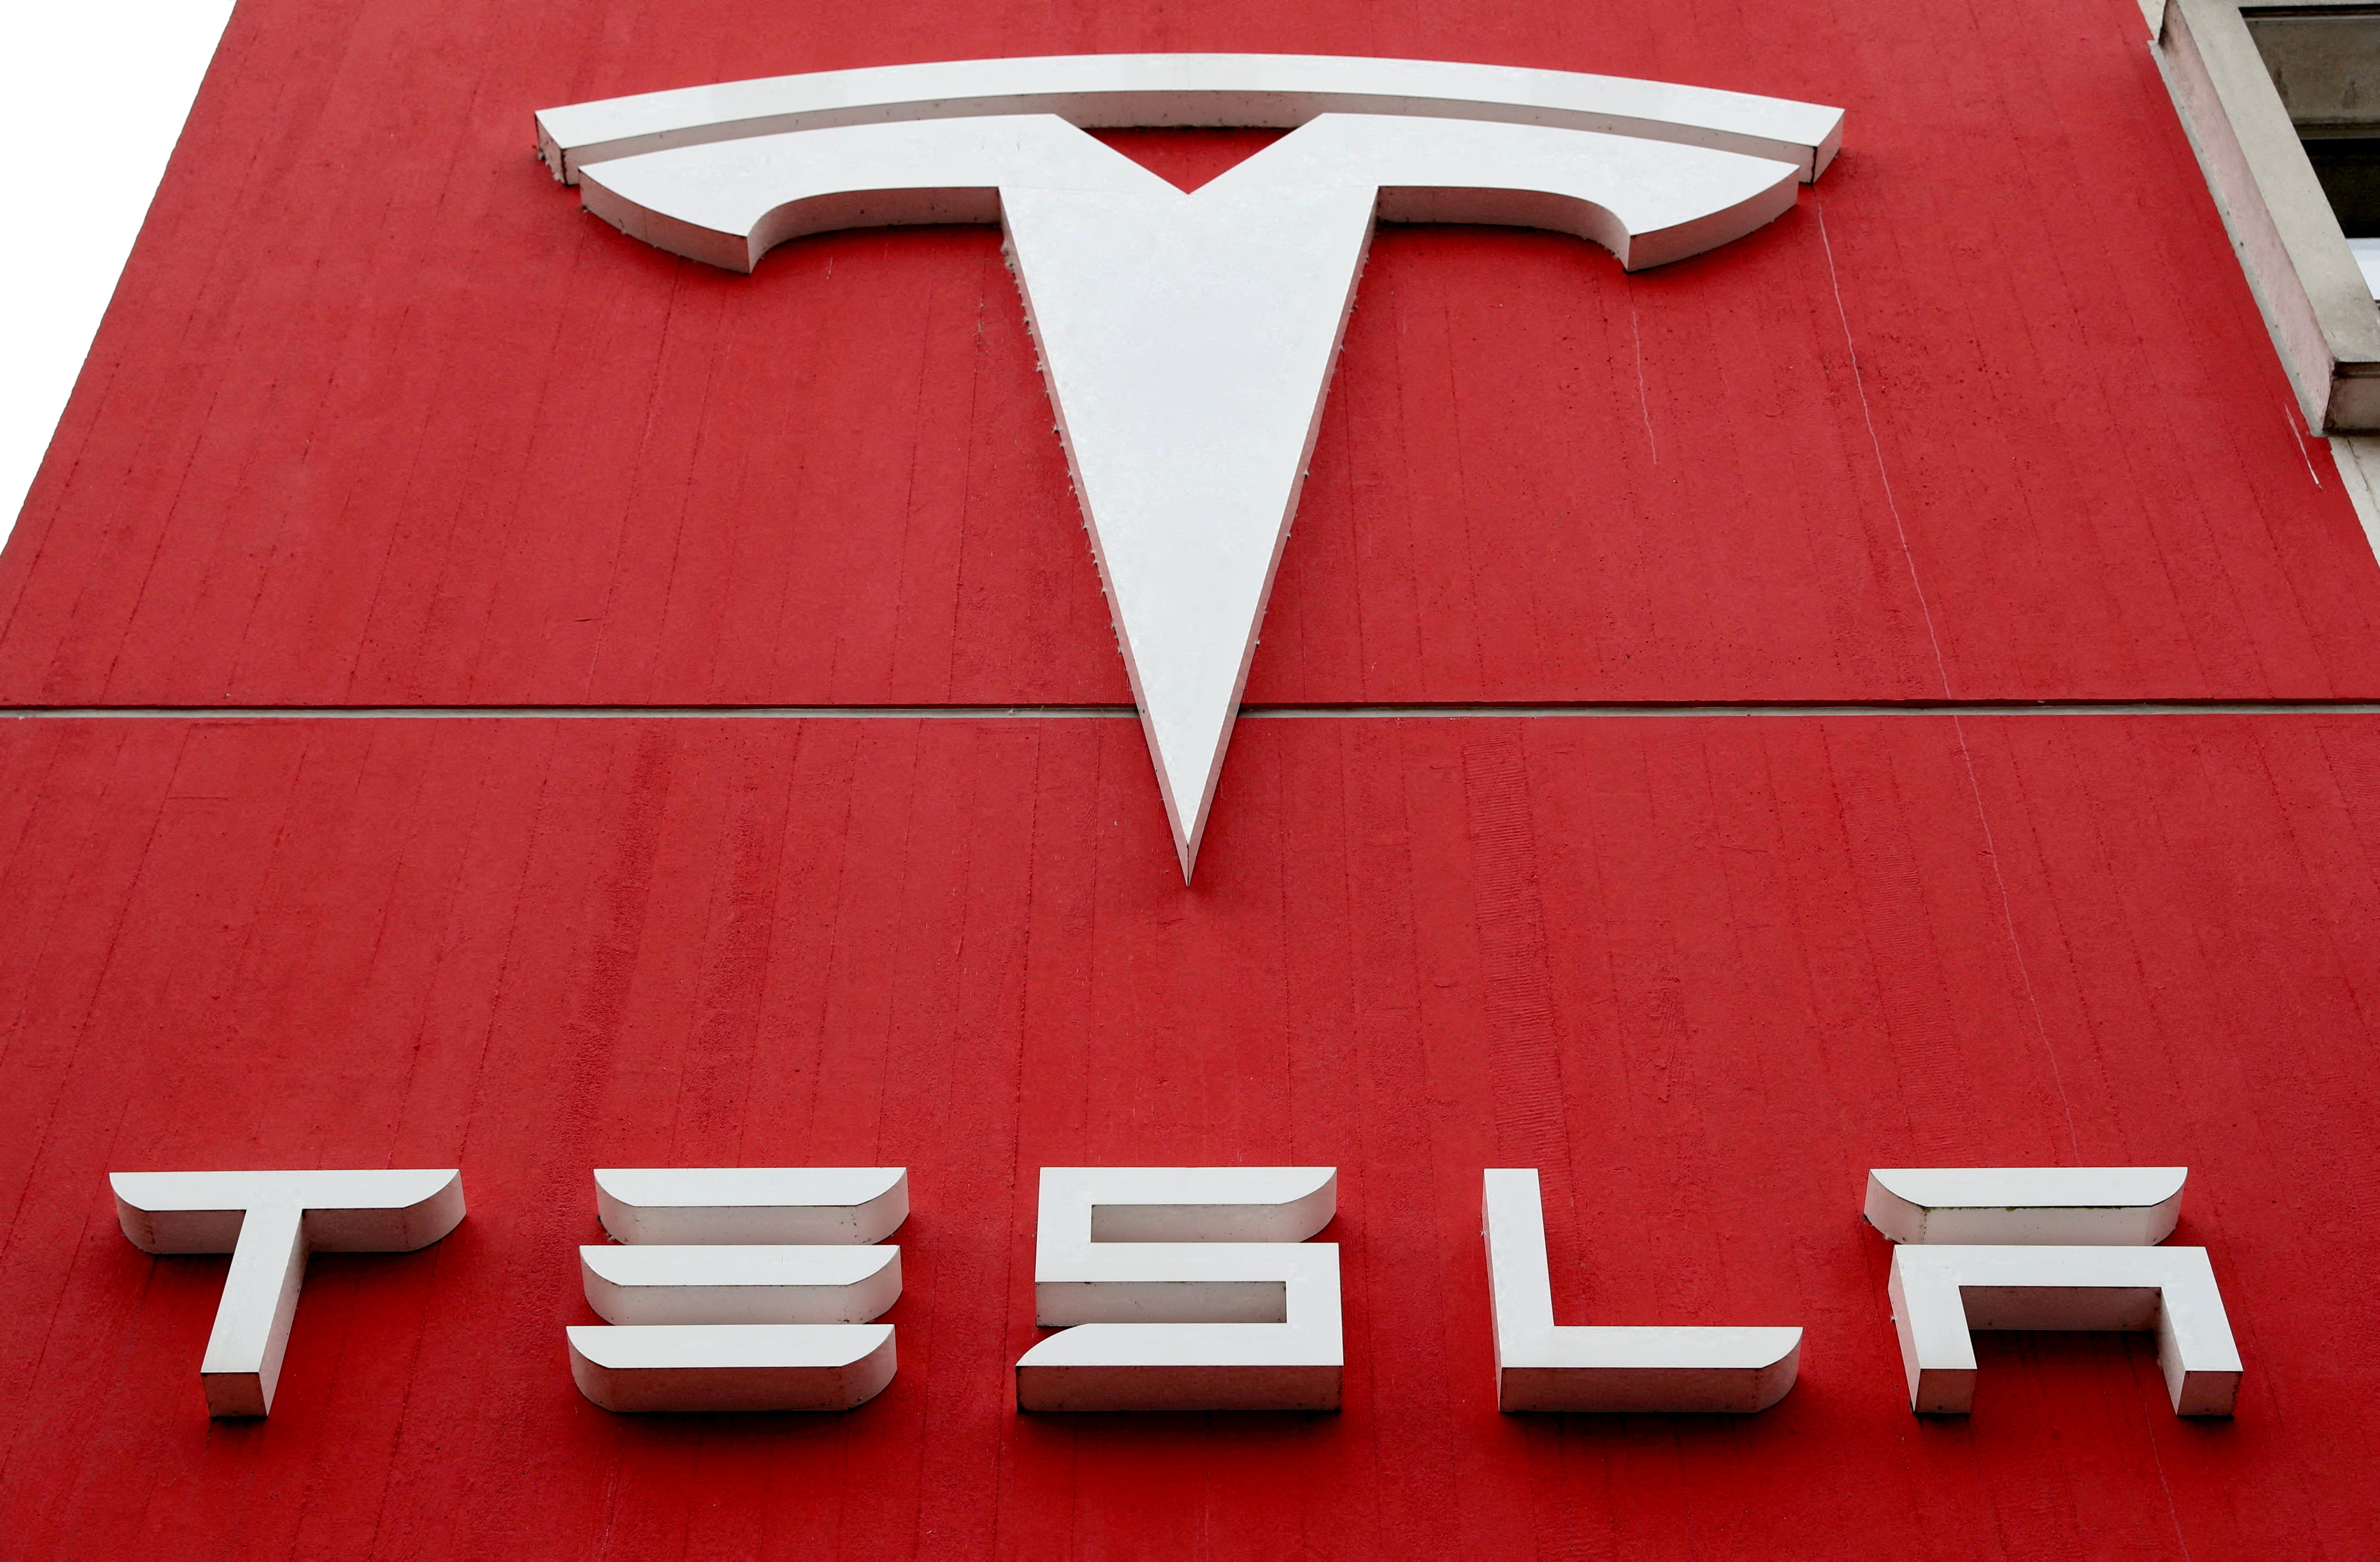 Tesla warns Core Lithium of potential lawsuit over failed deal